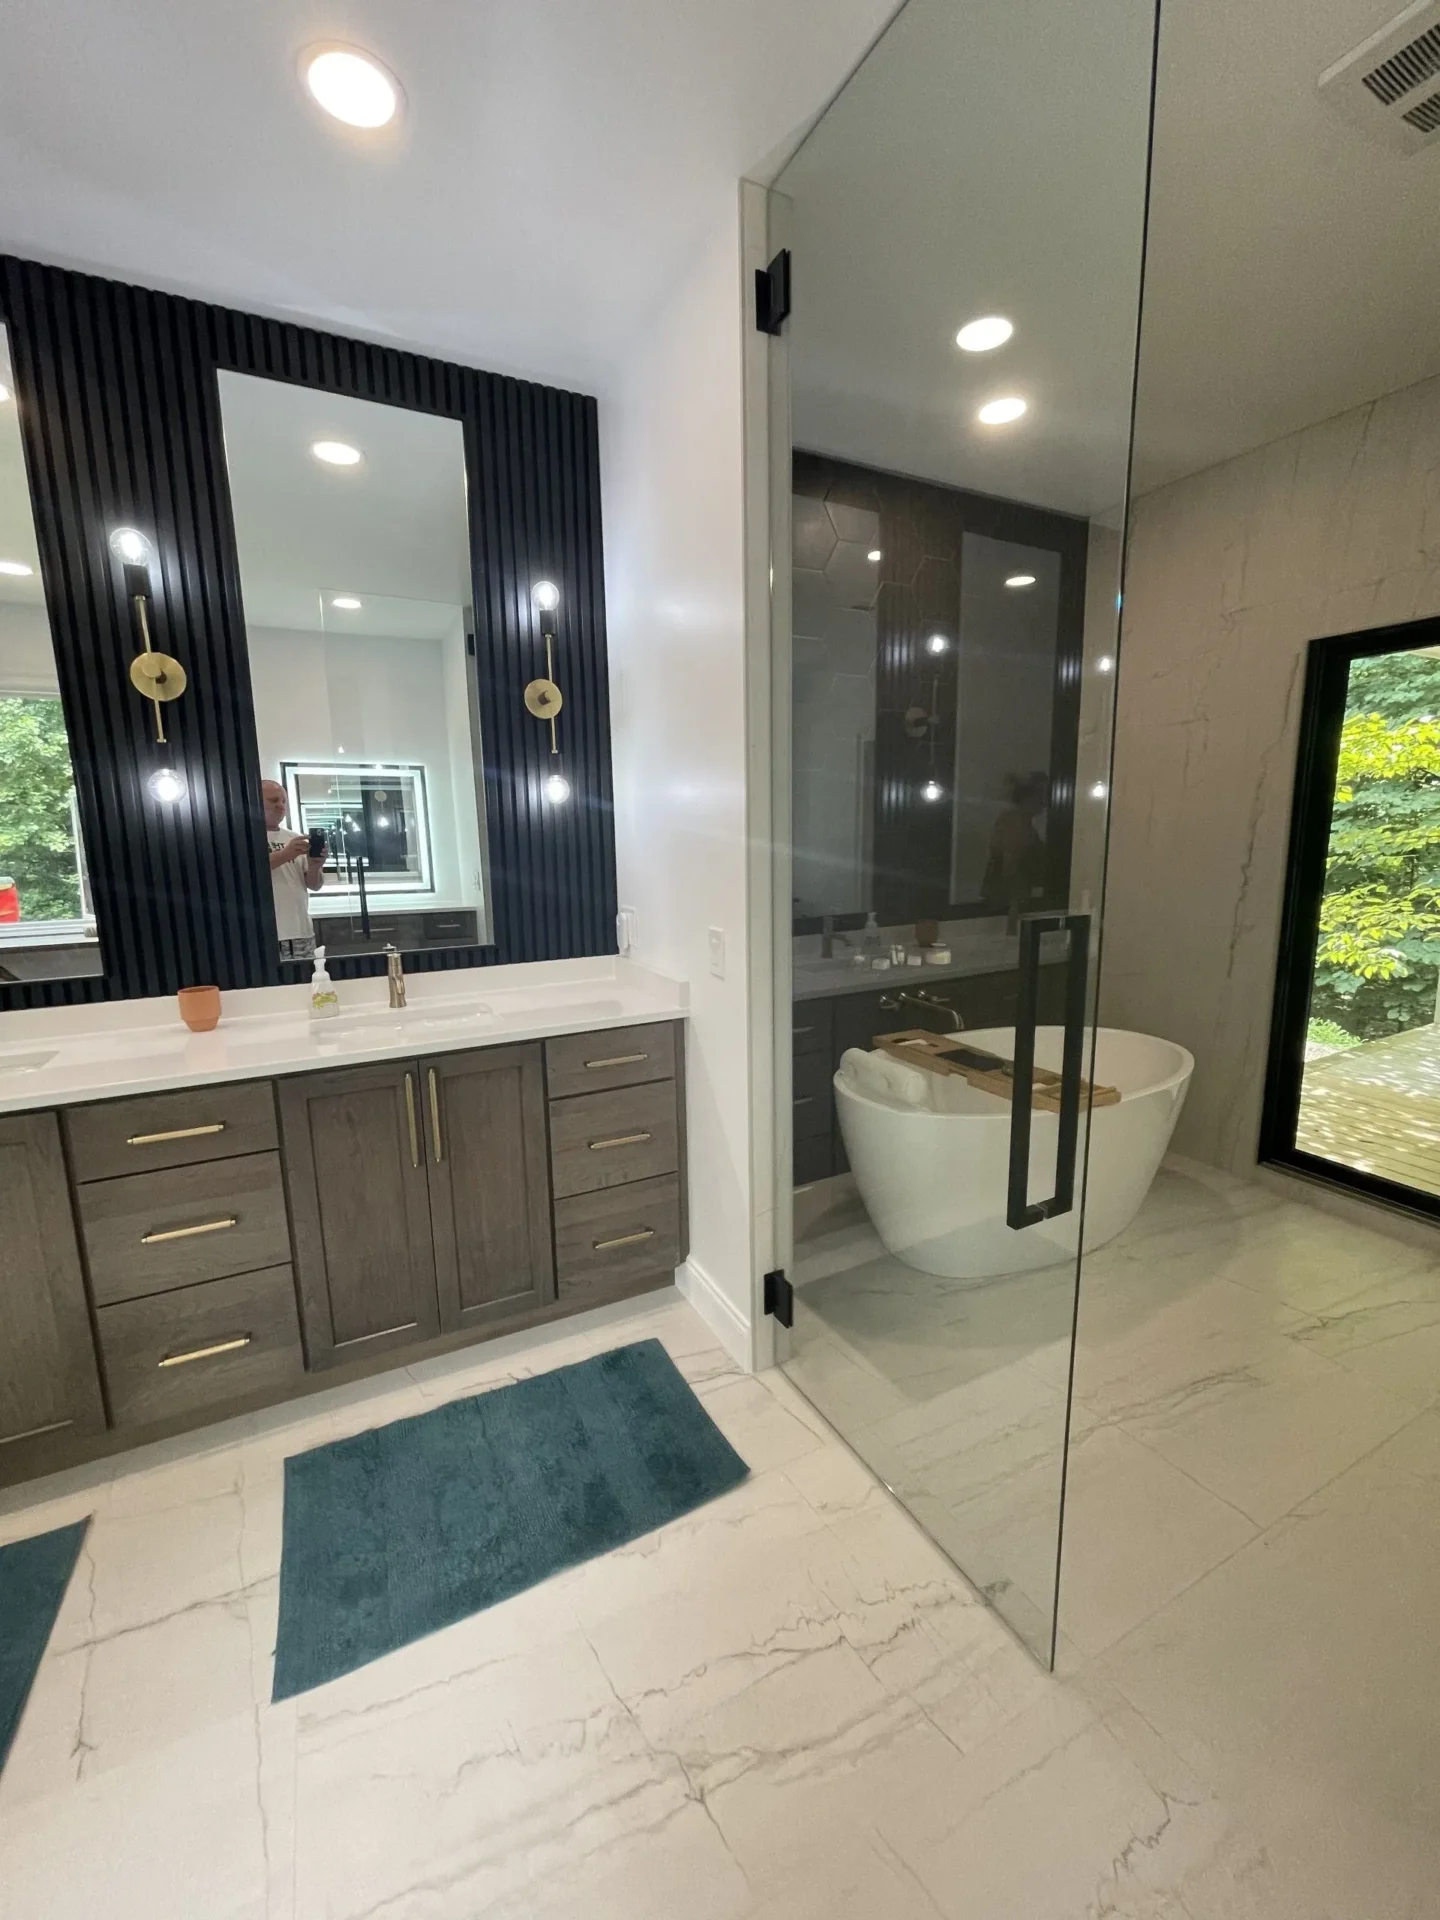 A bathroom with a large mirror and a sink.